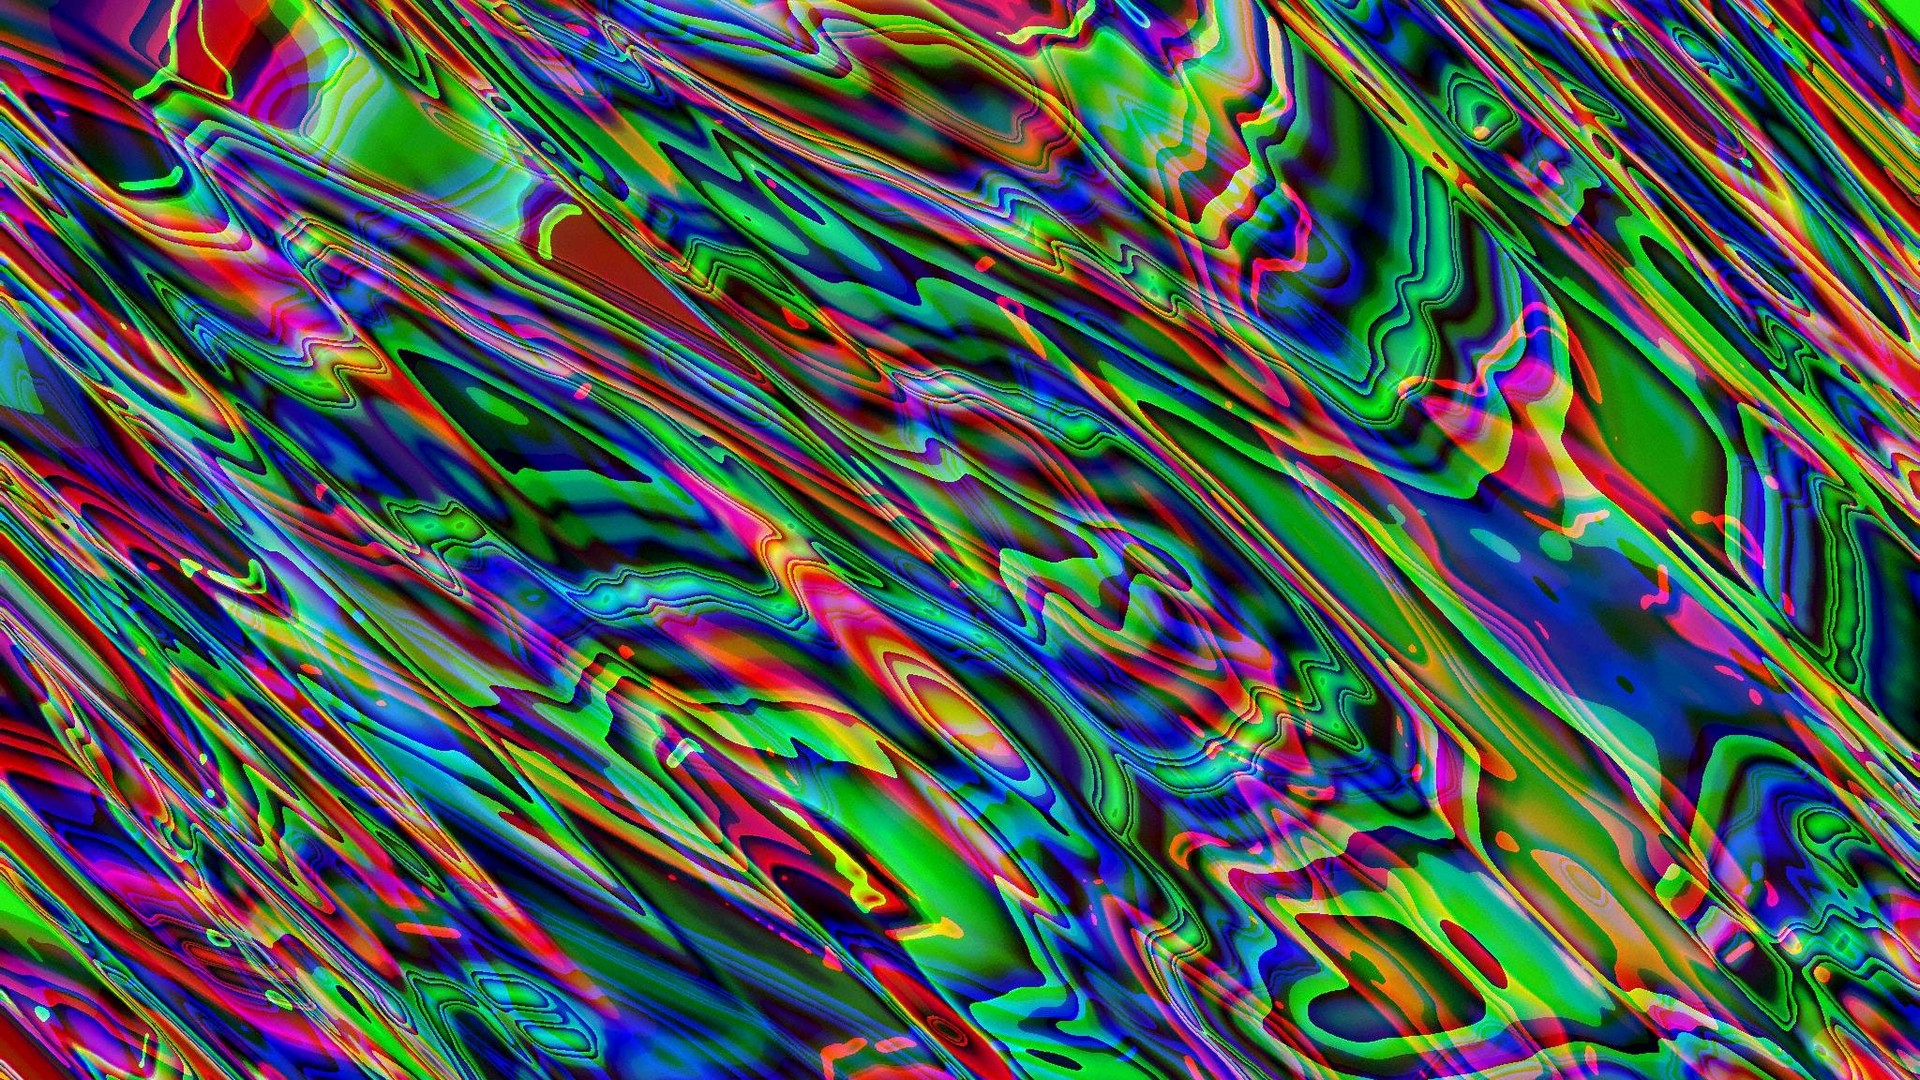 Trippy Colorful HD Backgrounds 1920x1080